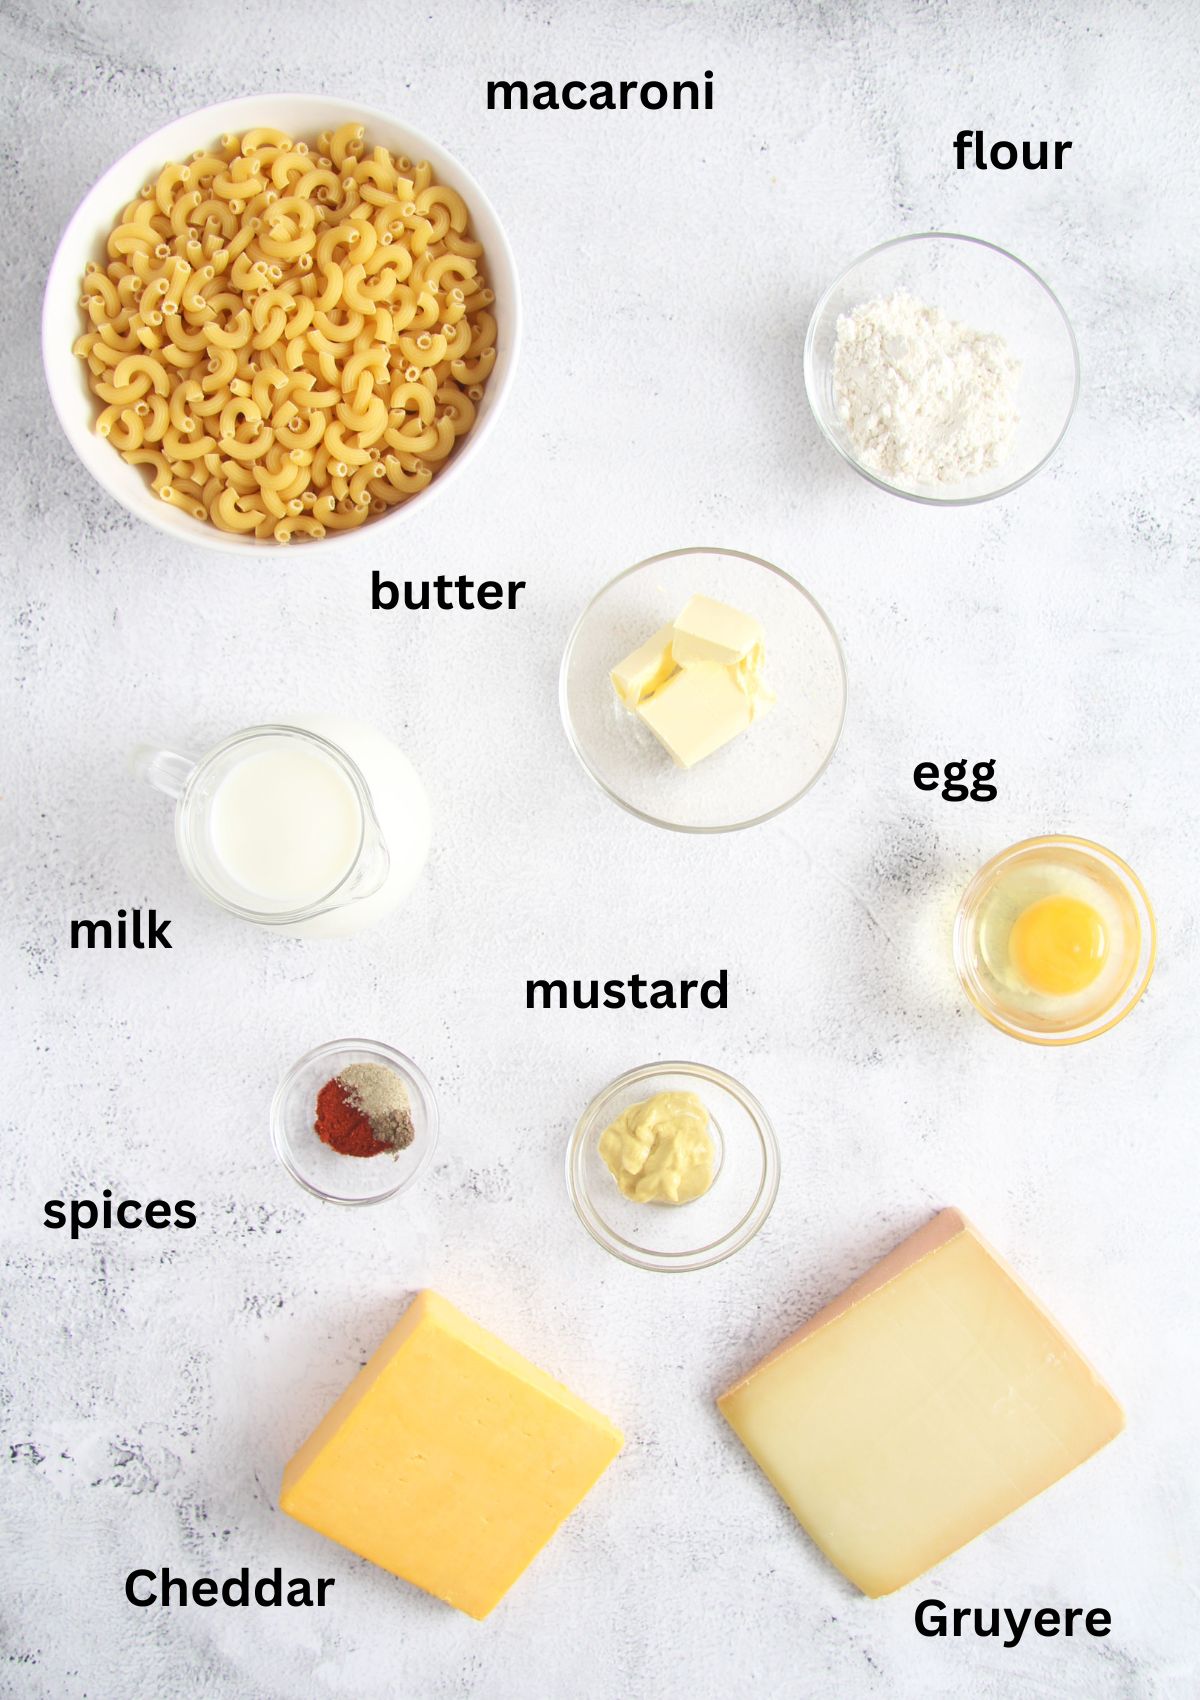 listed ingredients for making macaroni with cheese old-fashioned way.